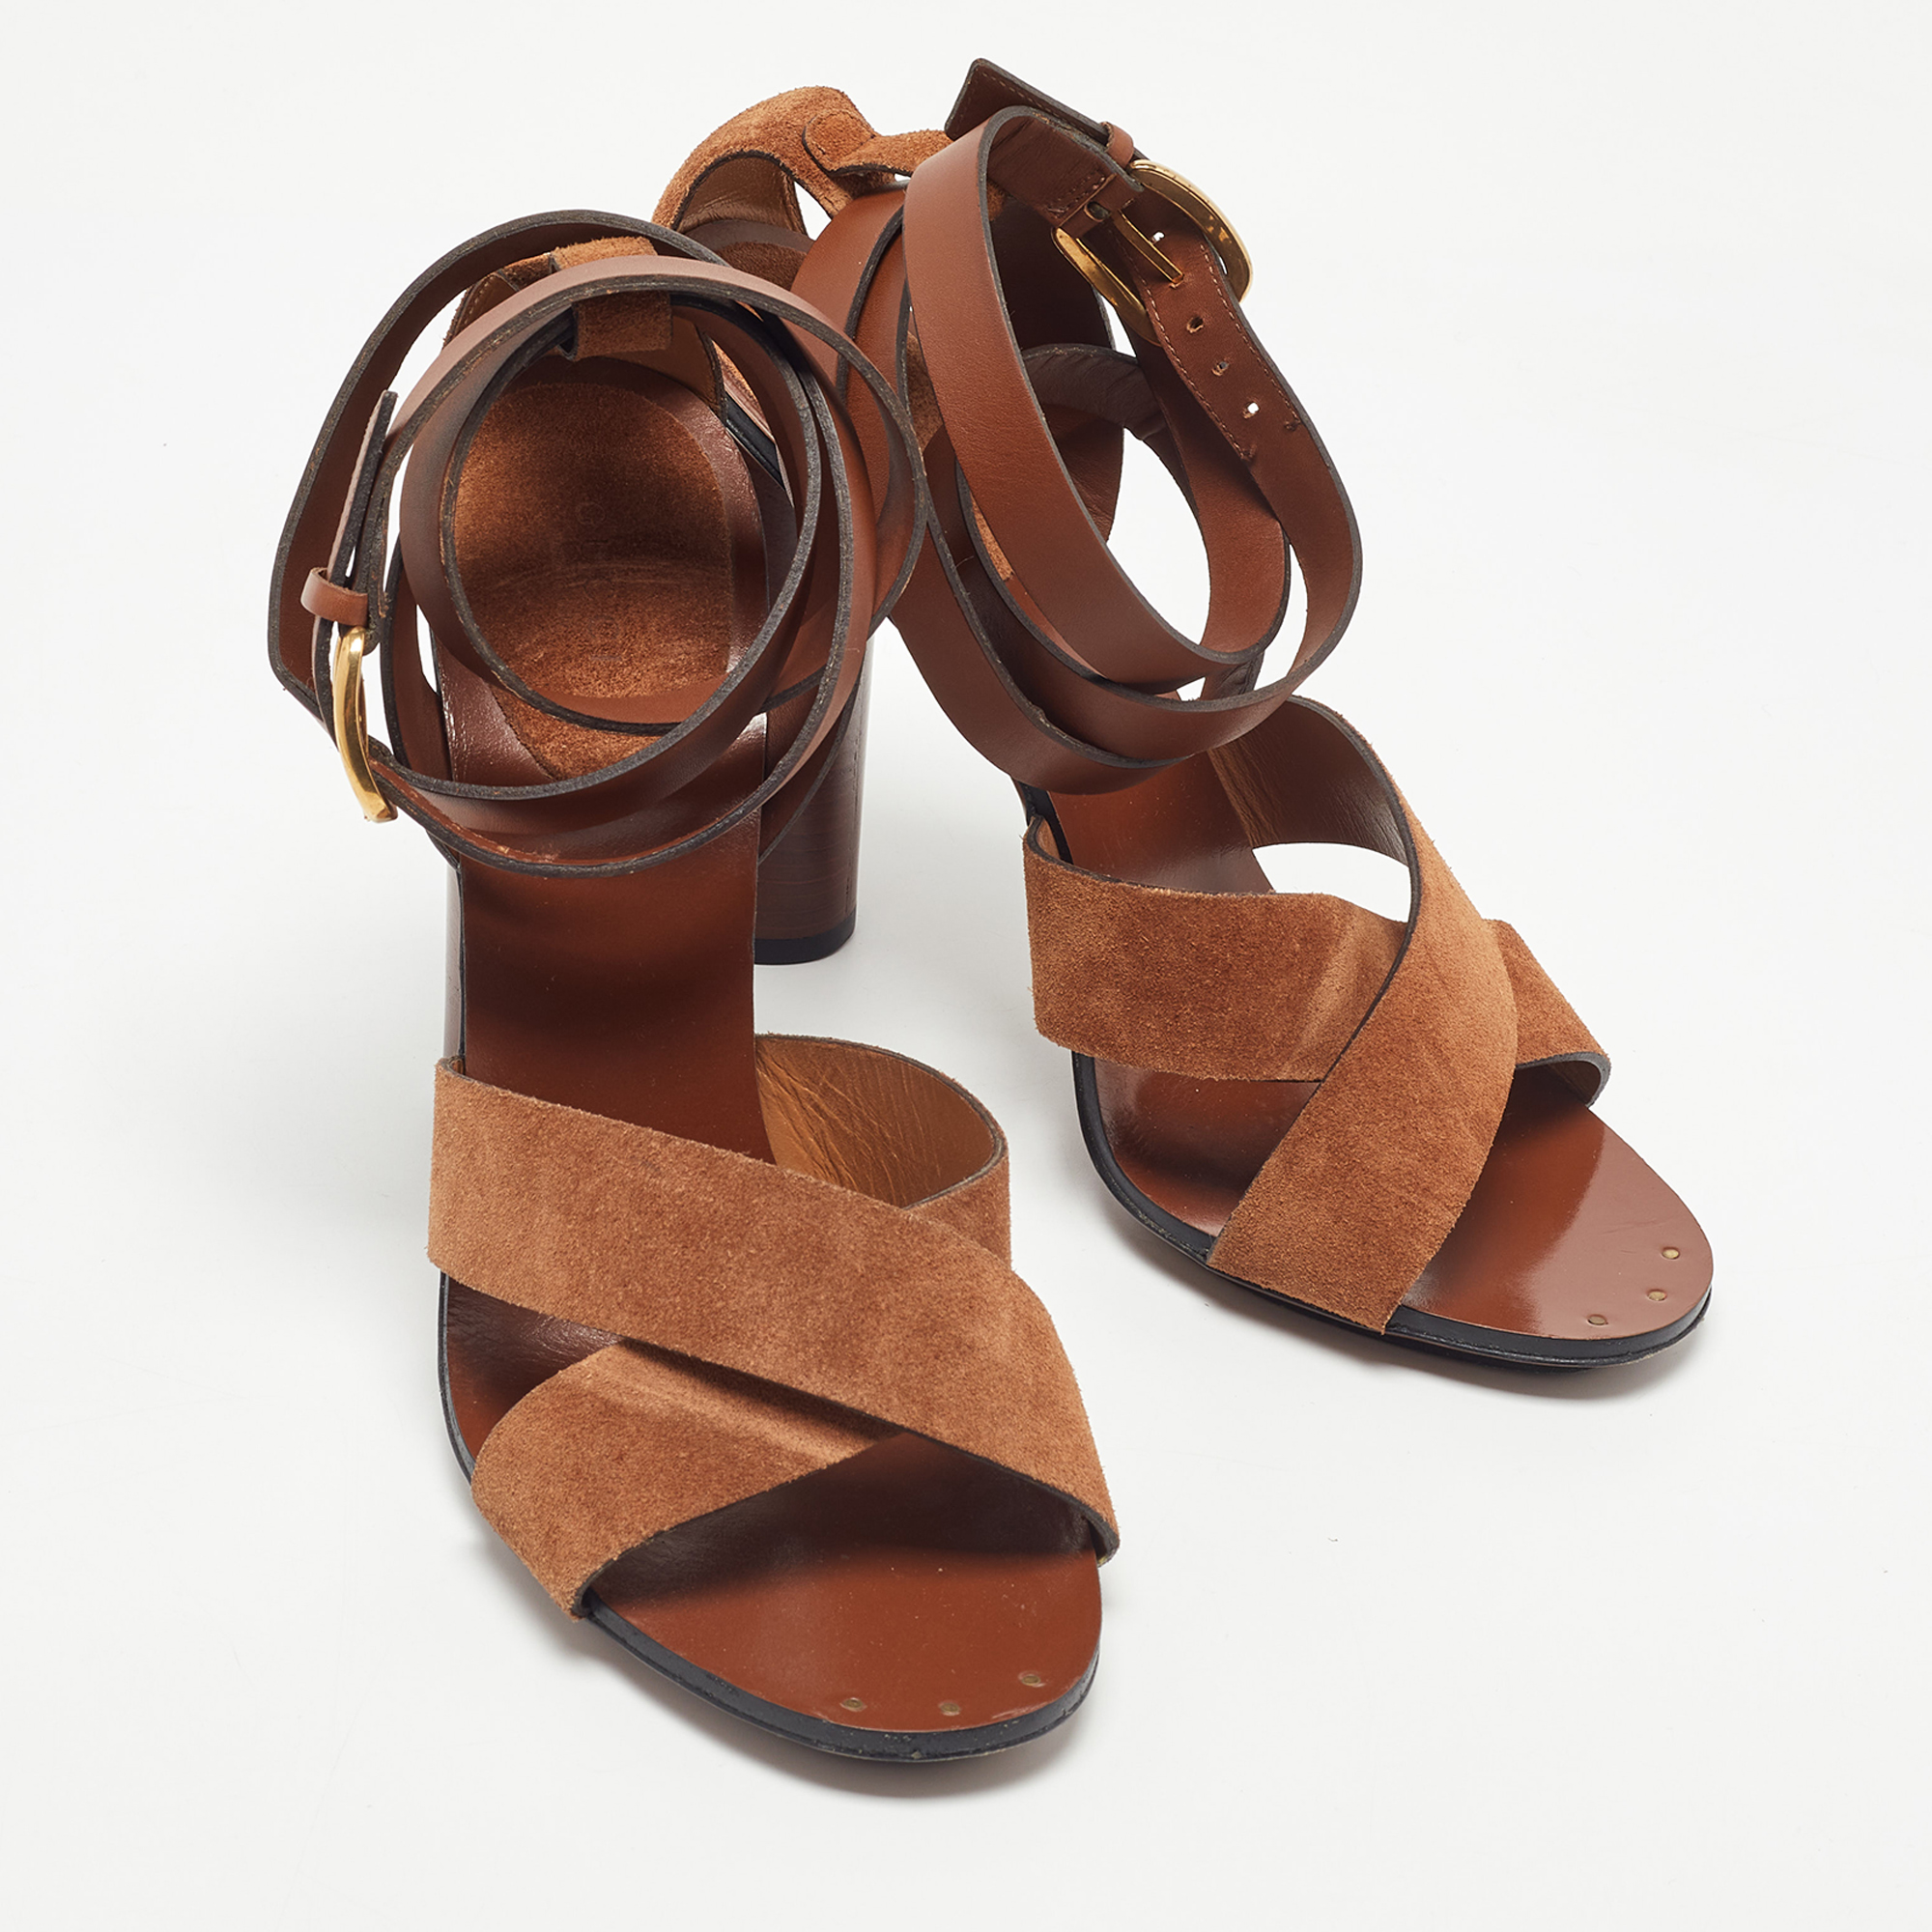 Gucci Brown Leather And Suede Candy Cross Sandals Size 39.5